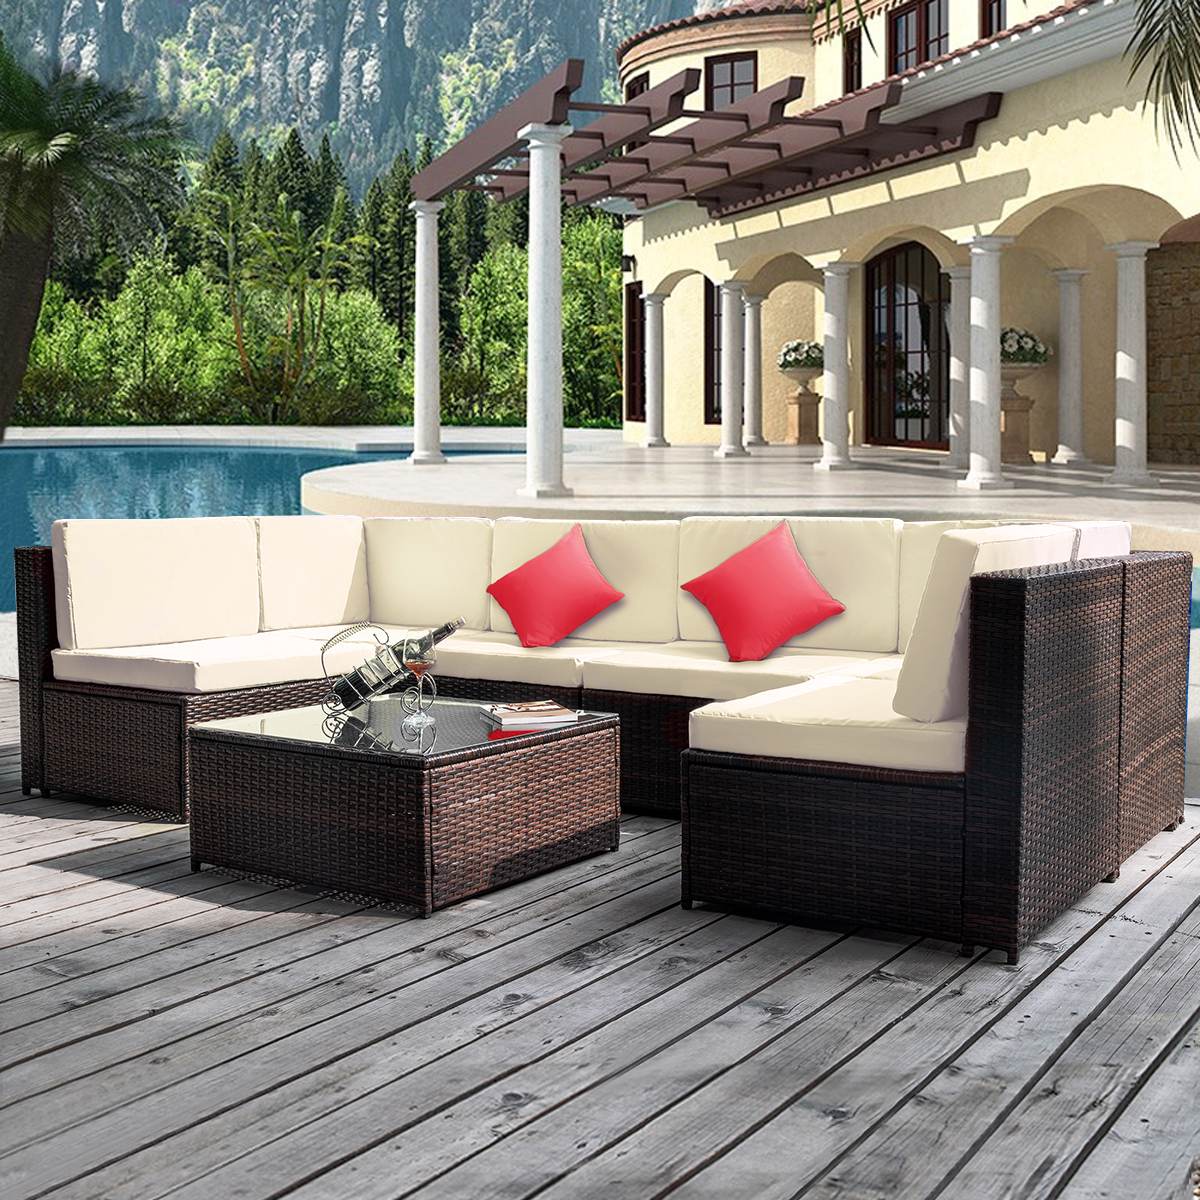 7 Piece Outdoor Patio Conversation Set, 6 Rattan Wicker Chairs with Glass Table, All-Weather Patio Sofa Furniture Set with Cushions for Backyard, Porch, Garden, Pool, L2314 - image 2 of 8